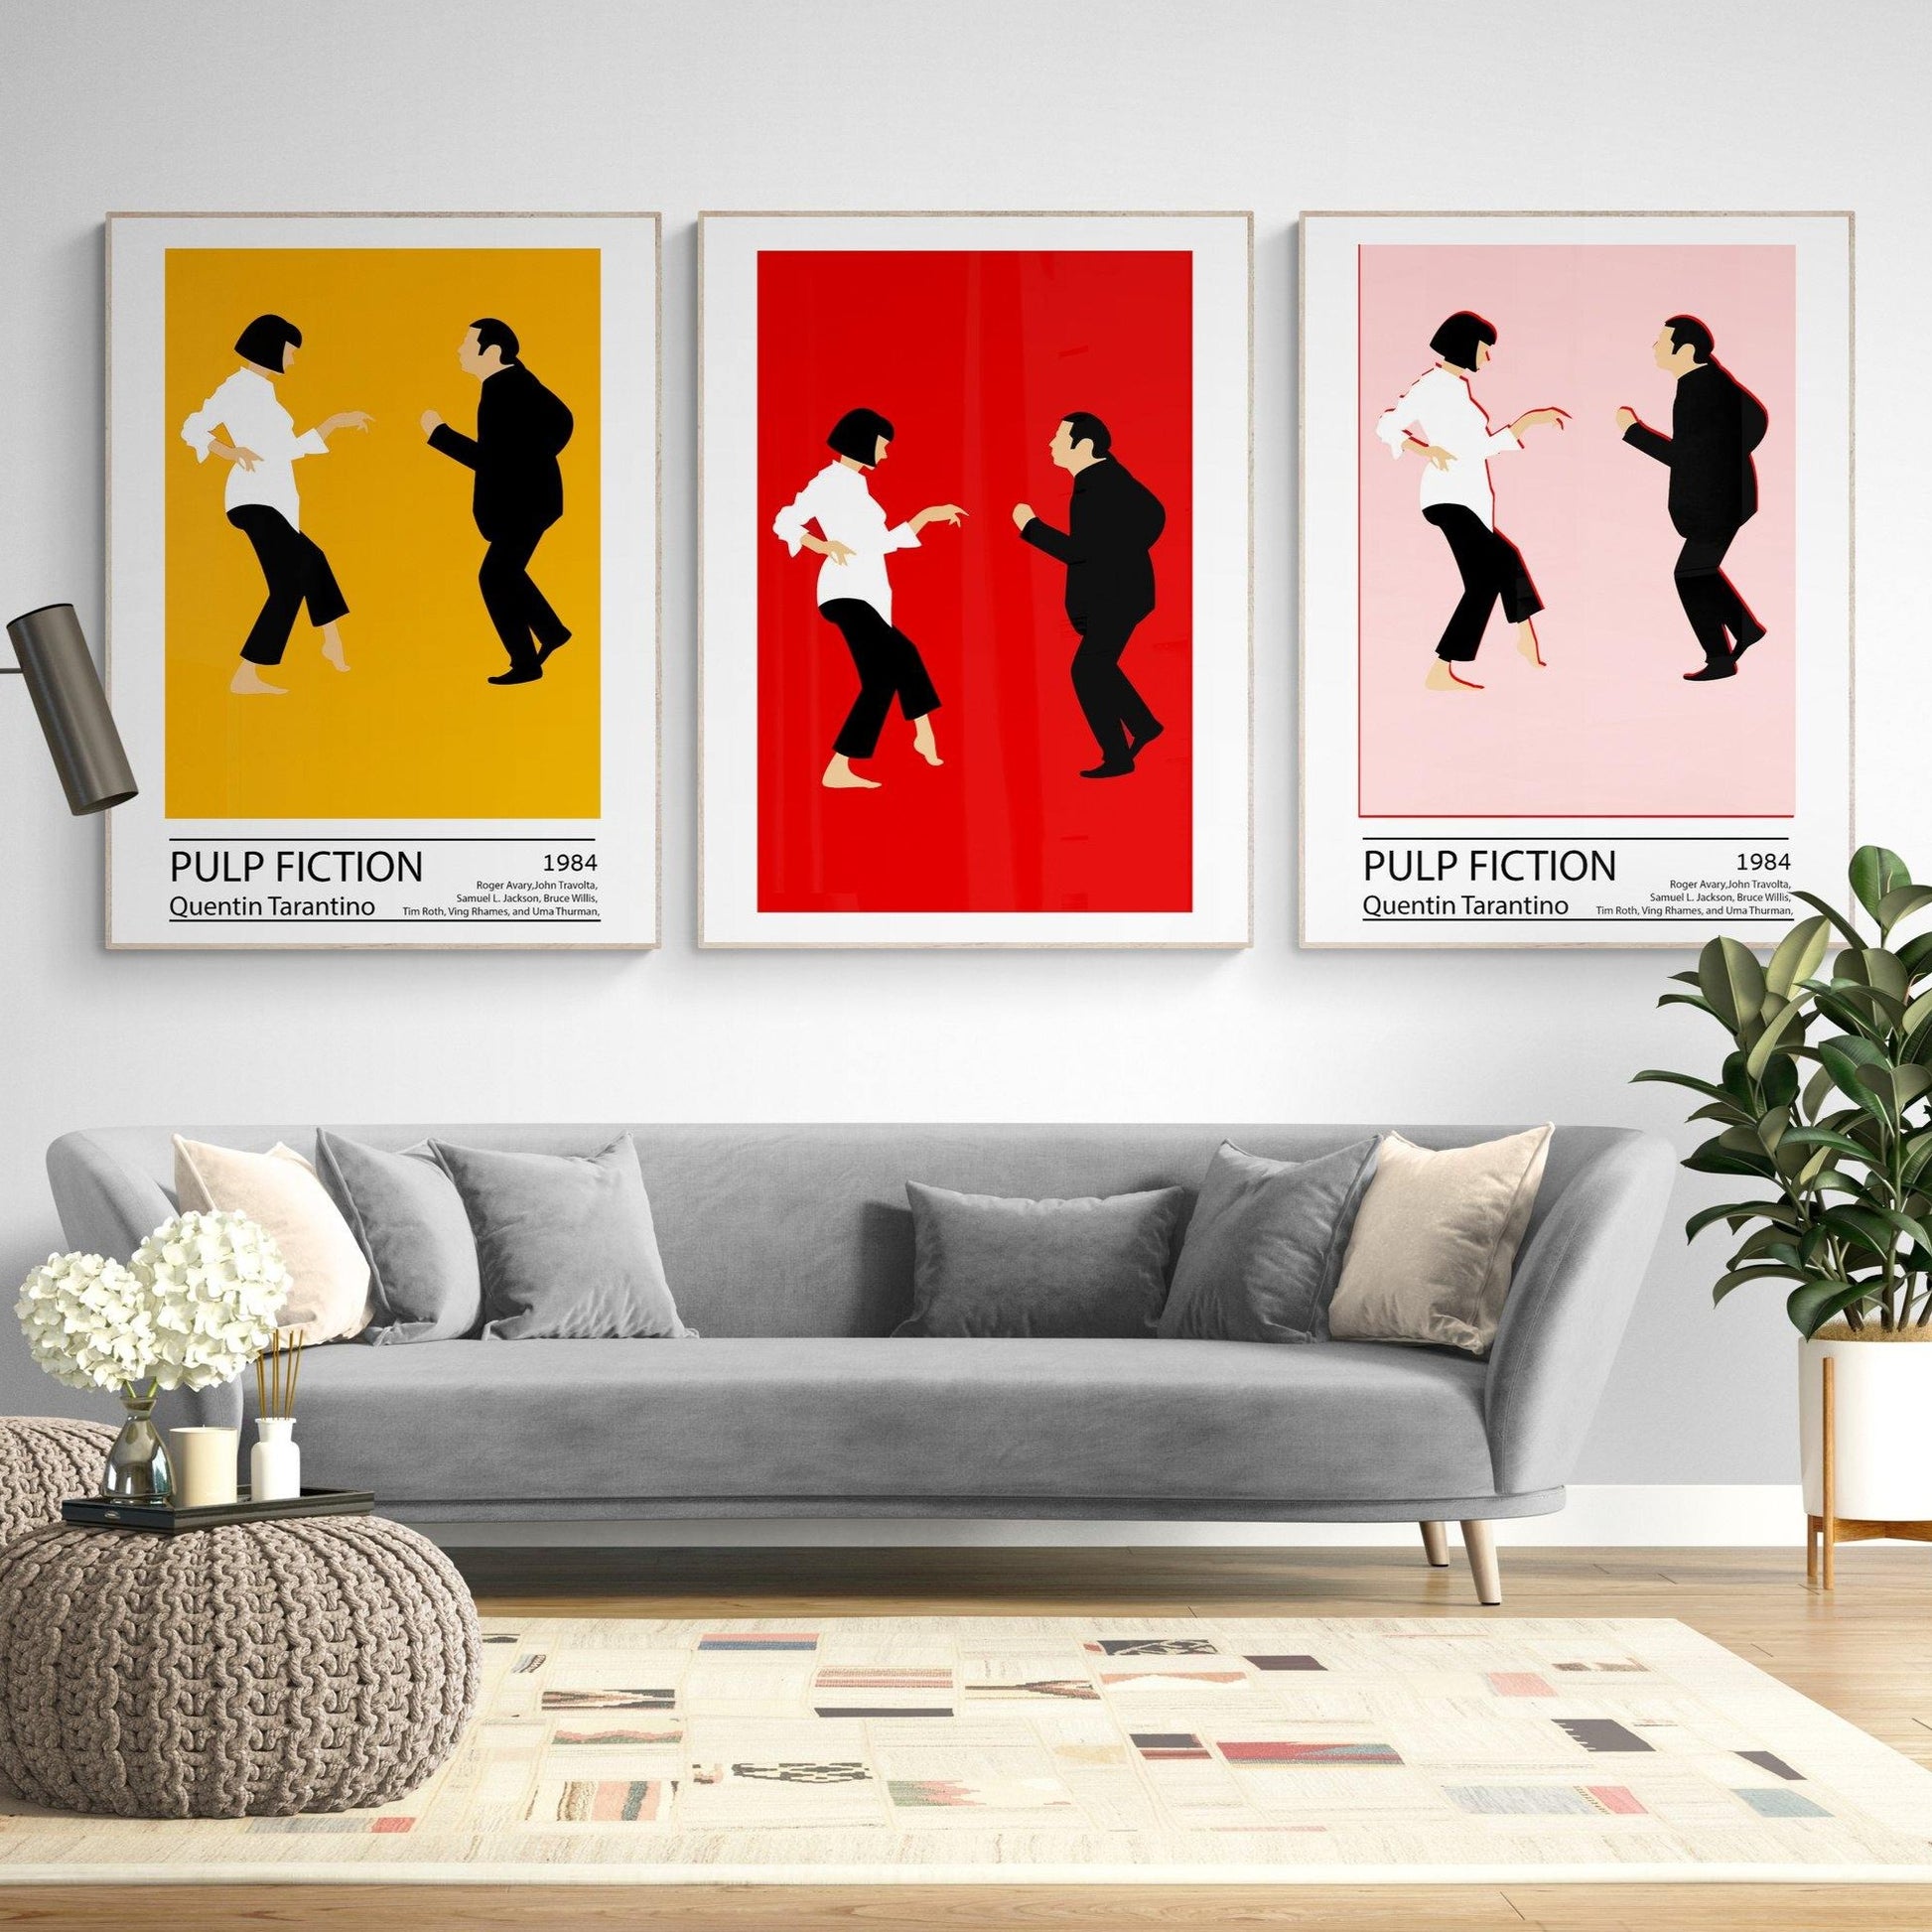 pulp fiction movie poster movie poster frame pulp fiction cover pulp fiction poster framed pulp fiction poster hd pulp fiction dance poster poster x poster pulp fiction dance pulp poster pulp fiction poster art pulp fiction film poster pulp fiction dance scene art pulp fiction hd poster